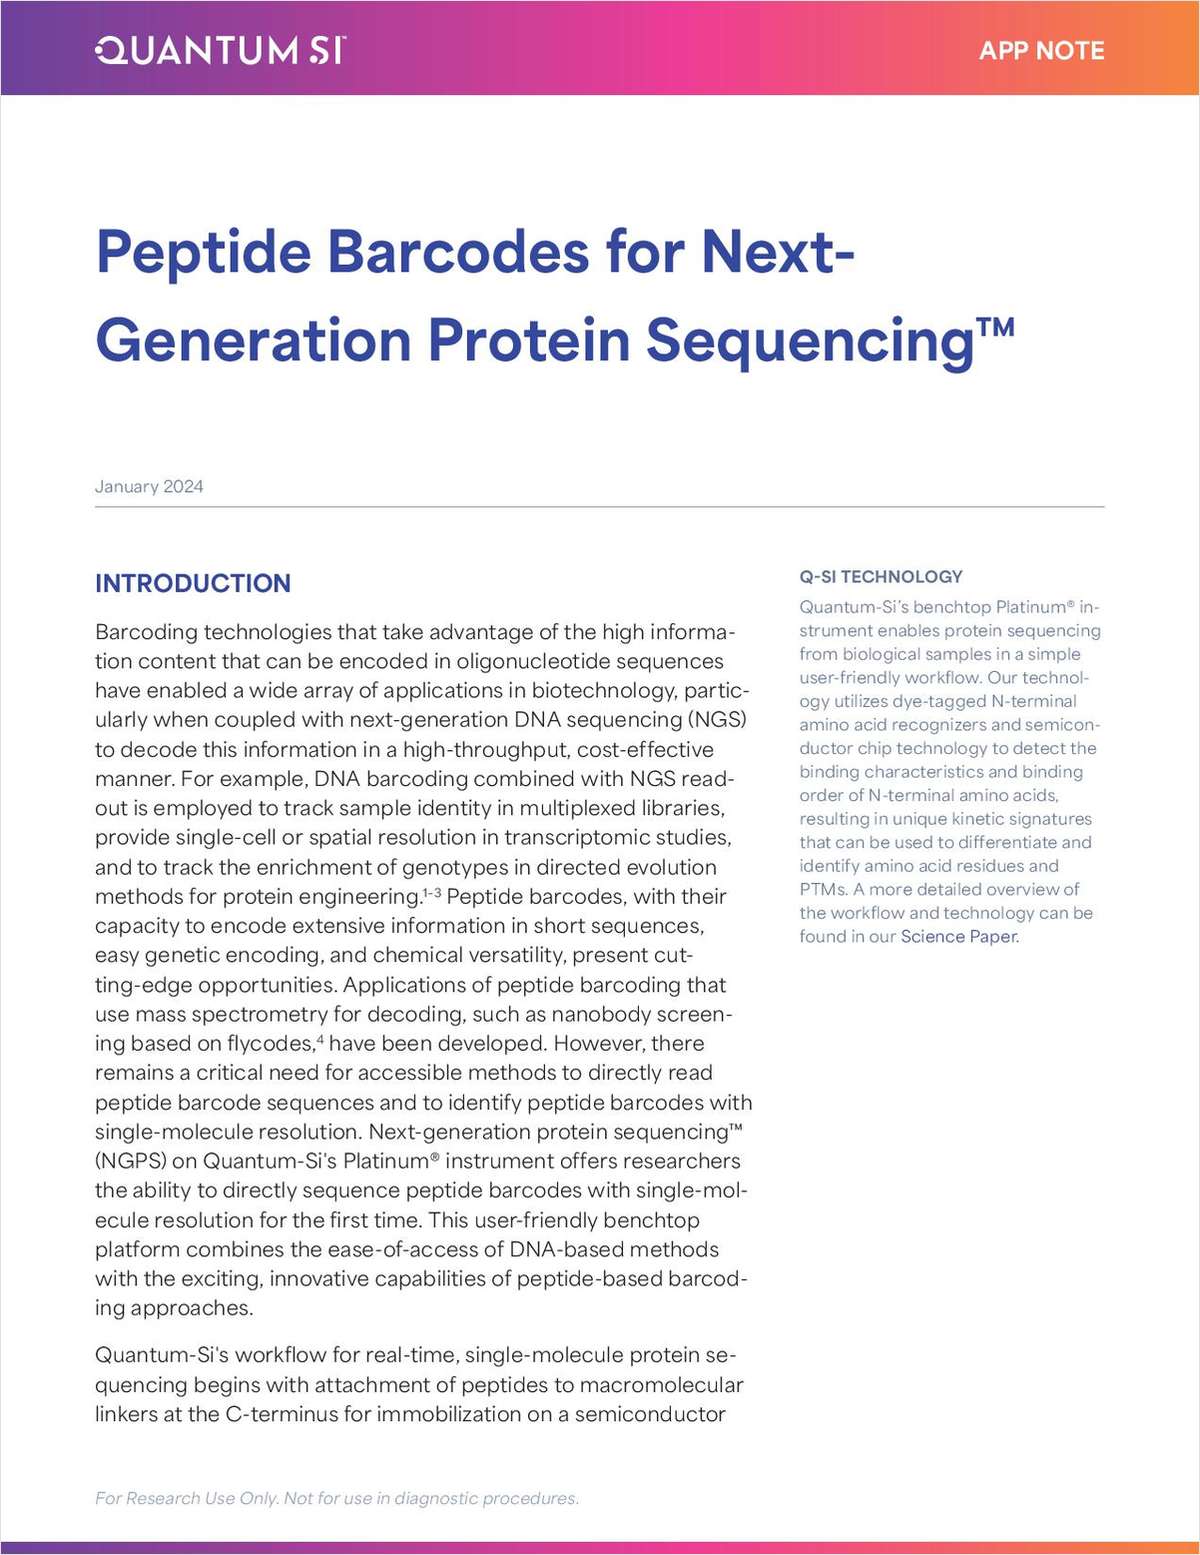 Peptide Barcodes for Next-Generation Protein Sequencing